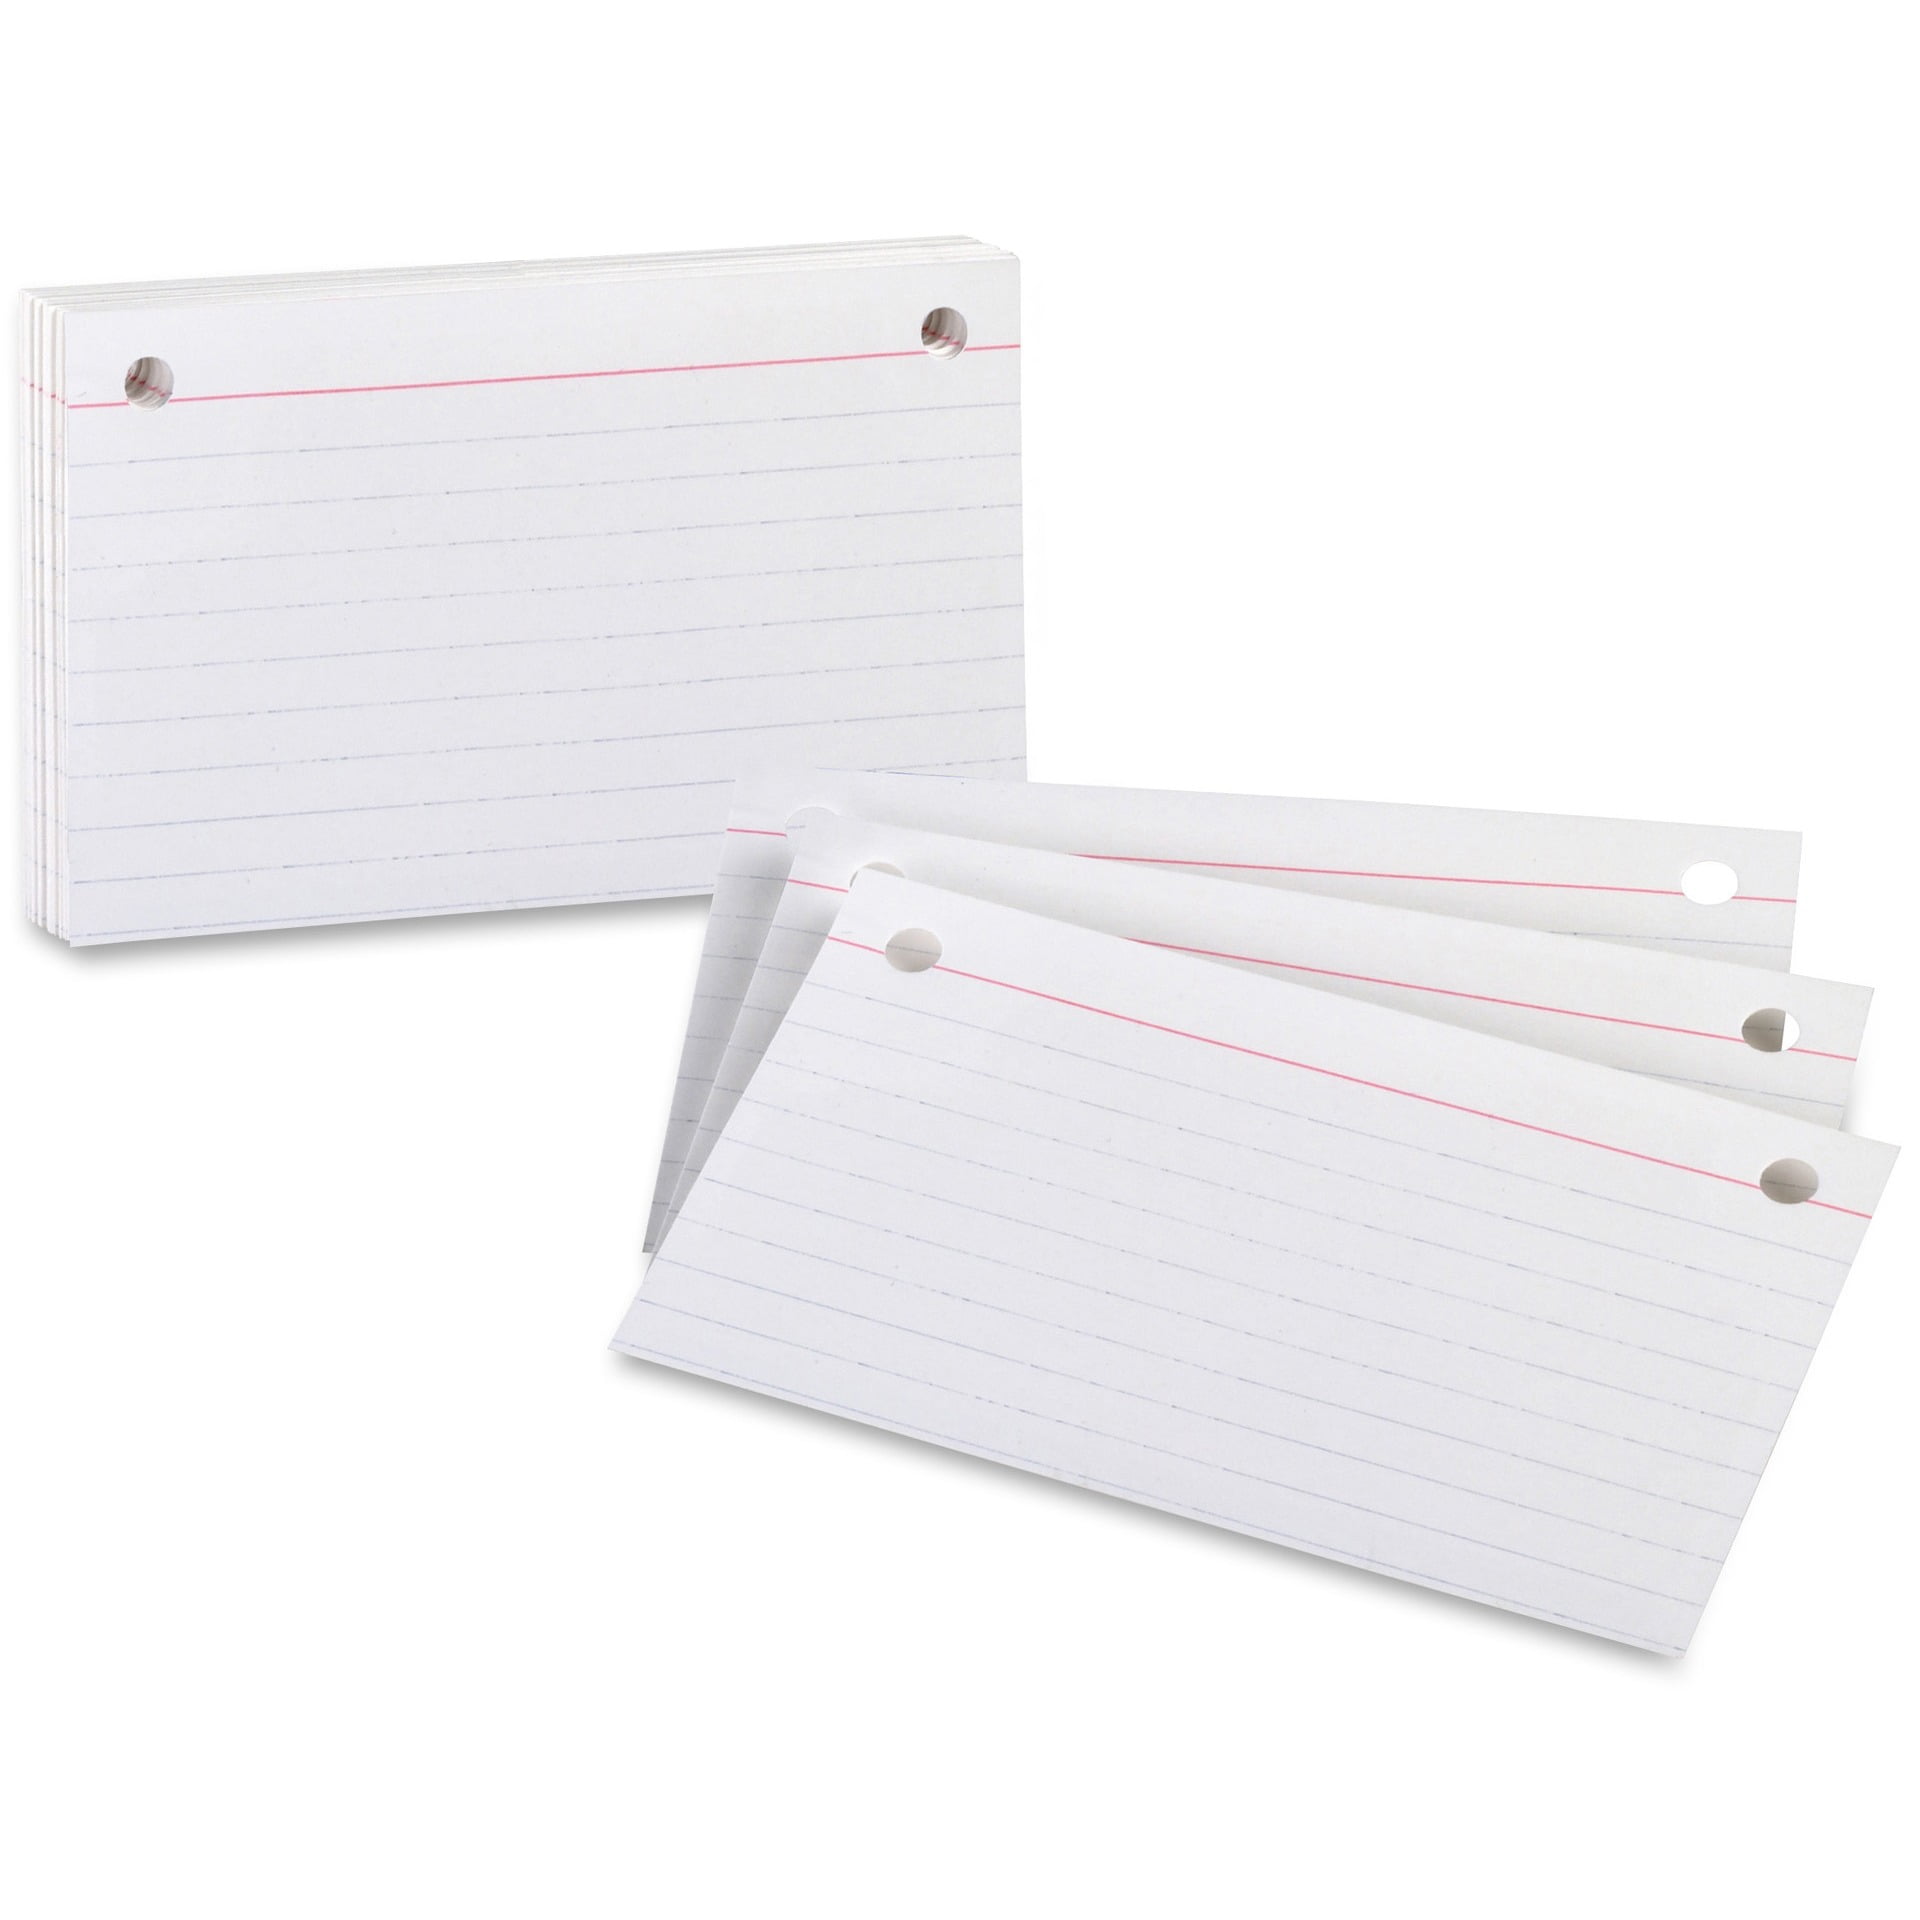 3X5 4X6 Inch American Index Card Index Cards Word Card Learning Plan Memo  Card Storage Box - AliExpress